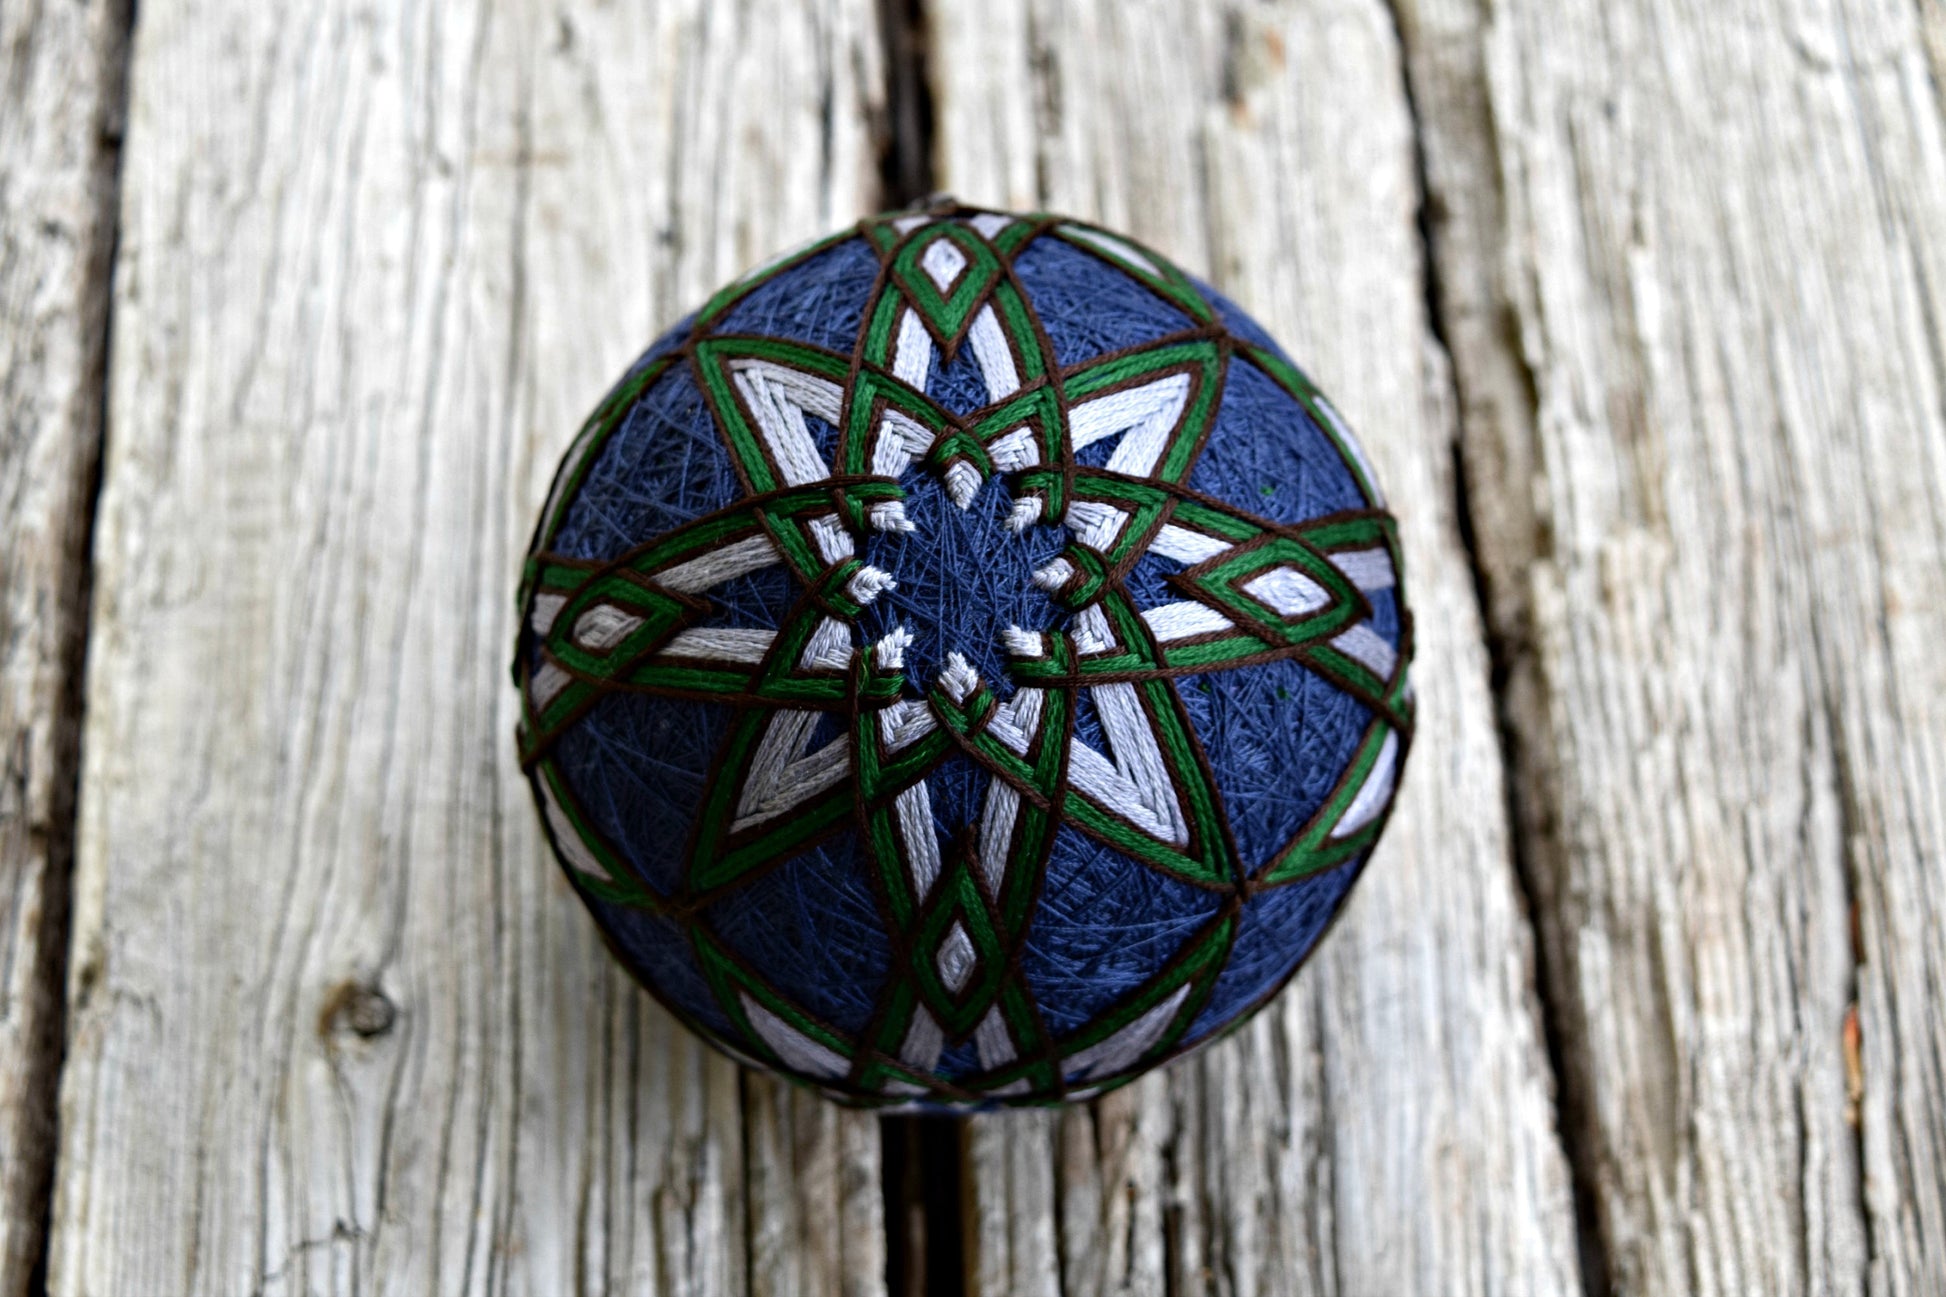 Navy temari ball embroidered with all over kiku design in grey, green, and brown